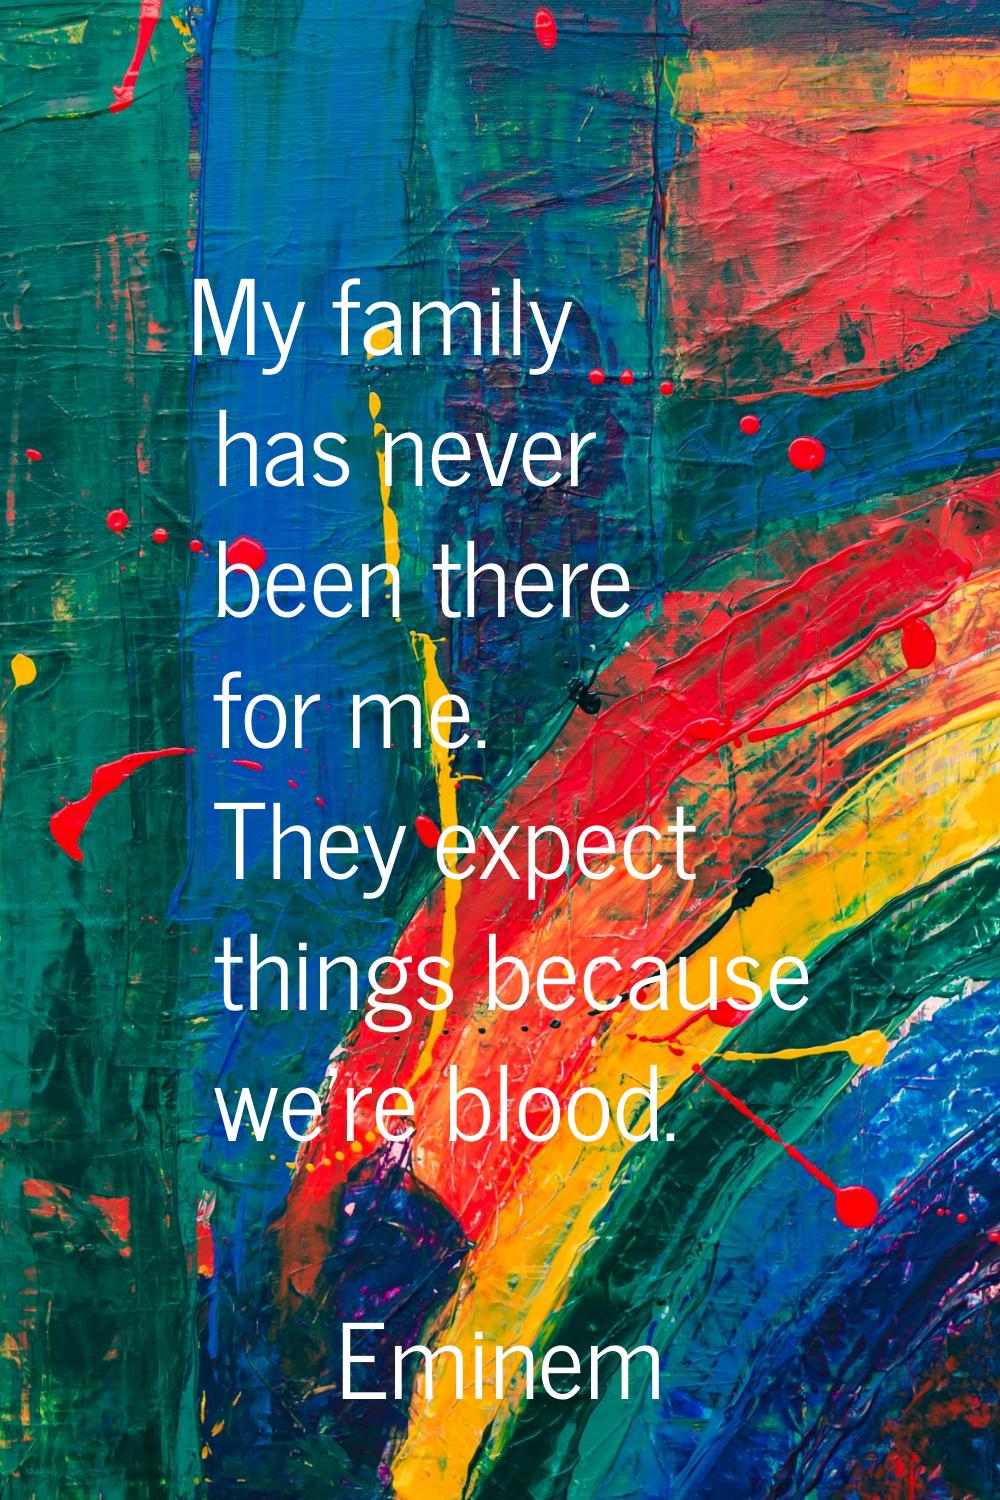 My family has never been there for me. They expect things because we're blood.